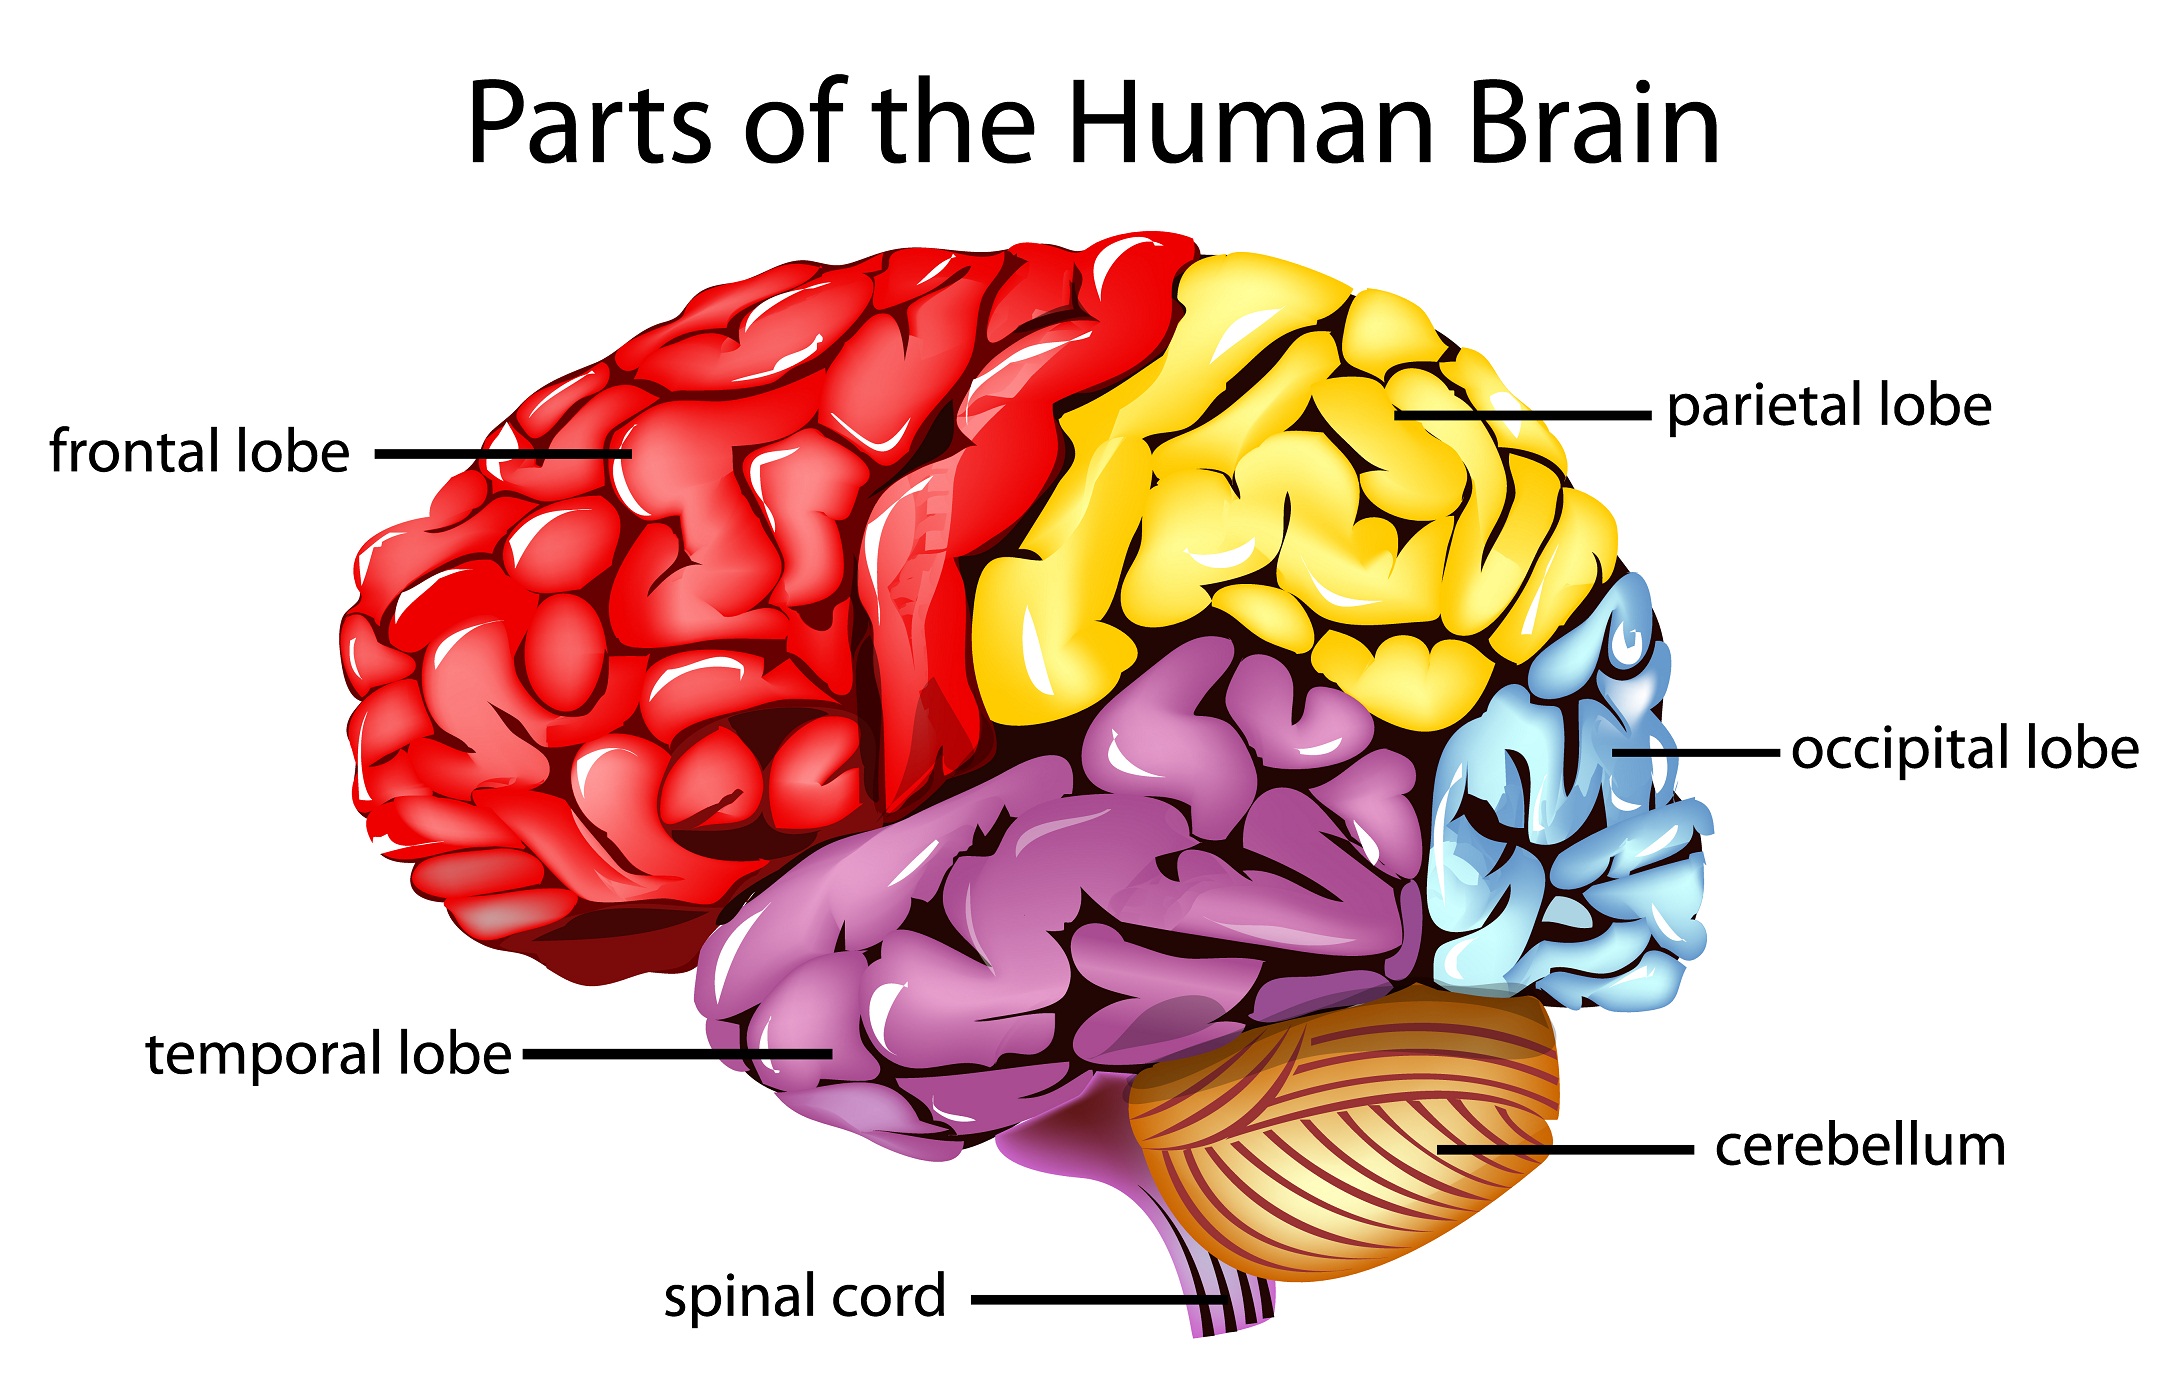 Simple Diagram Of The Human Brain Showing Its Primary Divisions